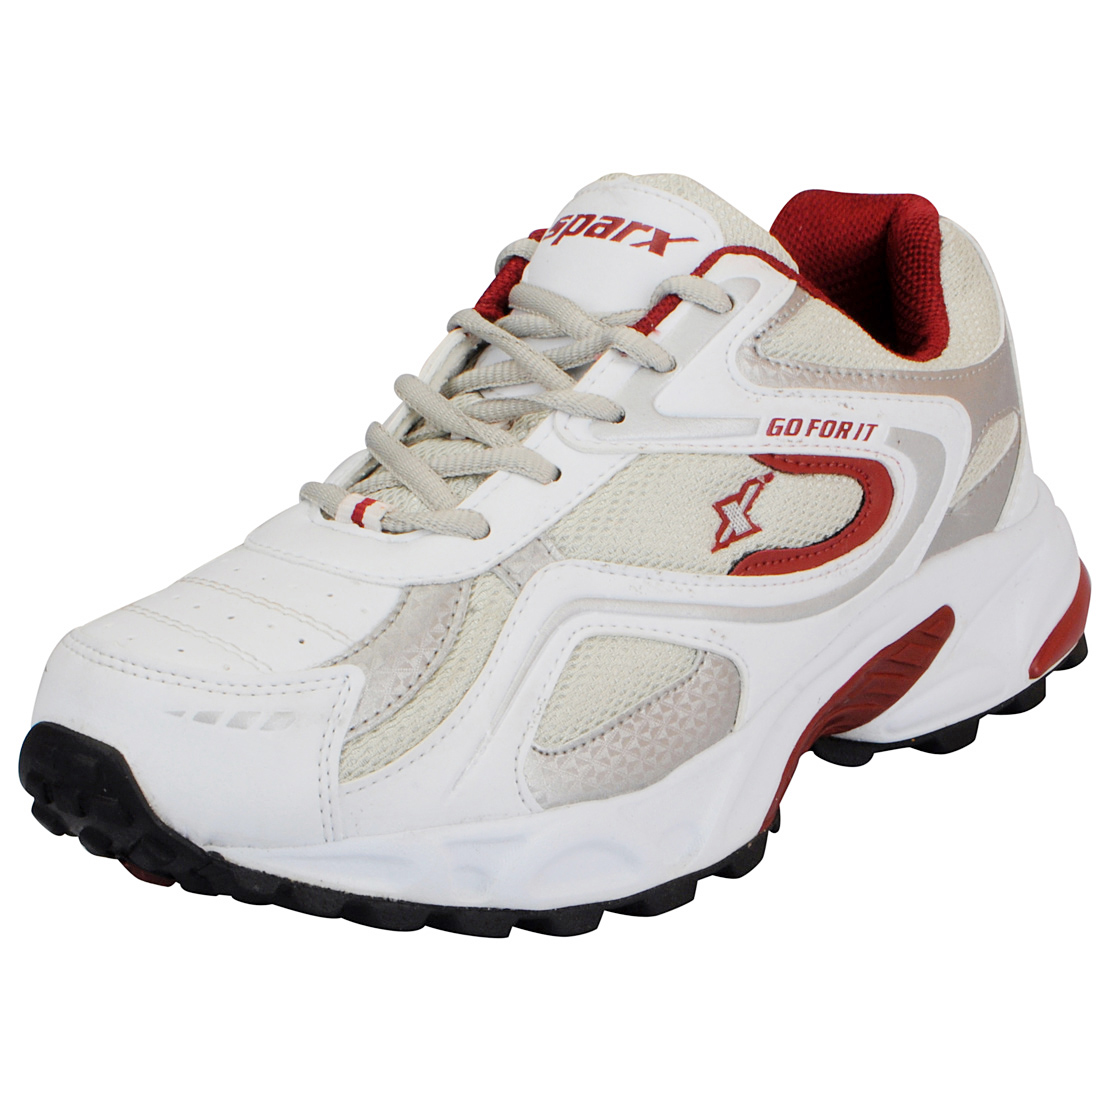 Buy Sparx White Maroon Mens Sports Running Shoes Online @ ₹1509 from ...